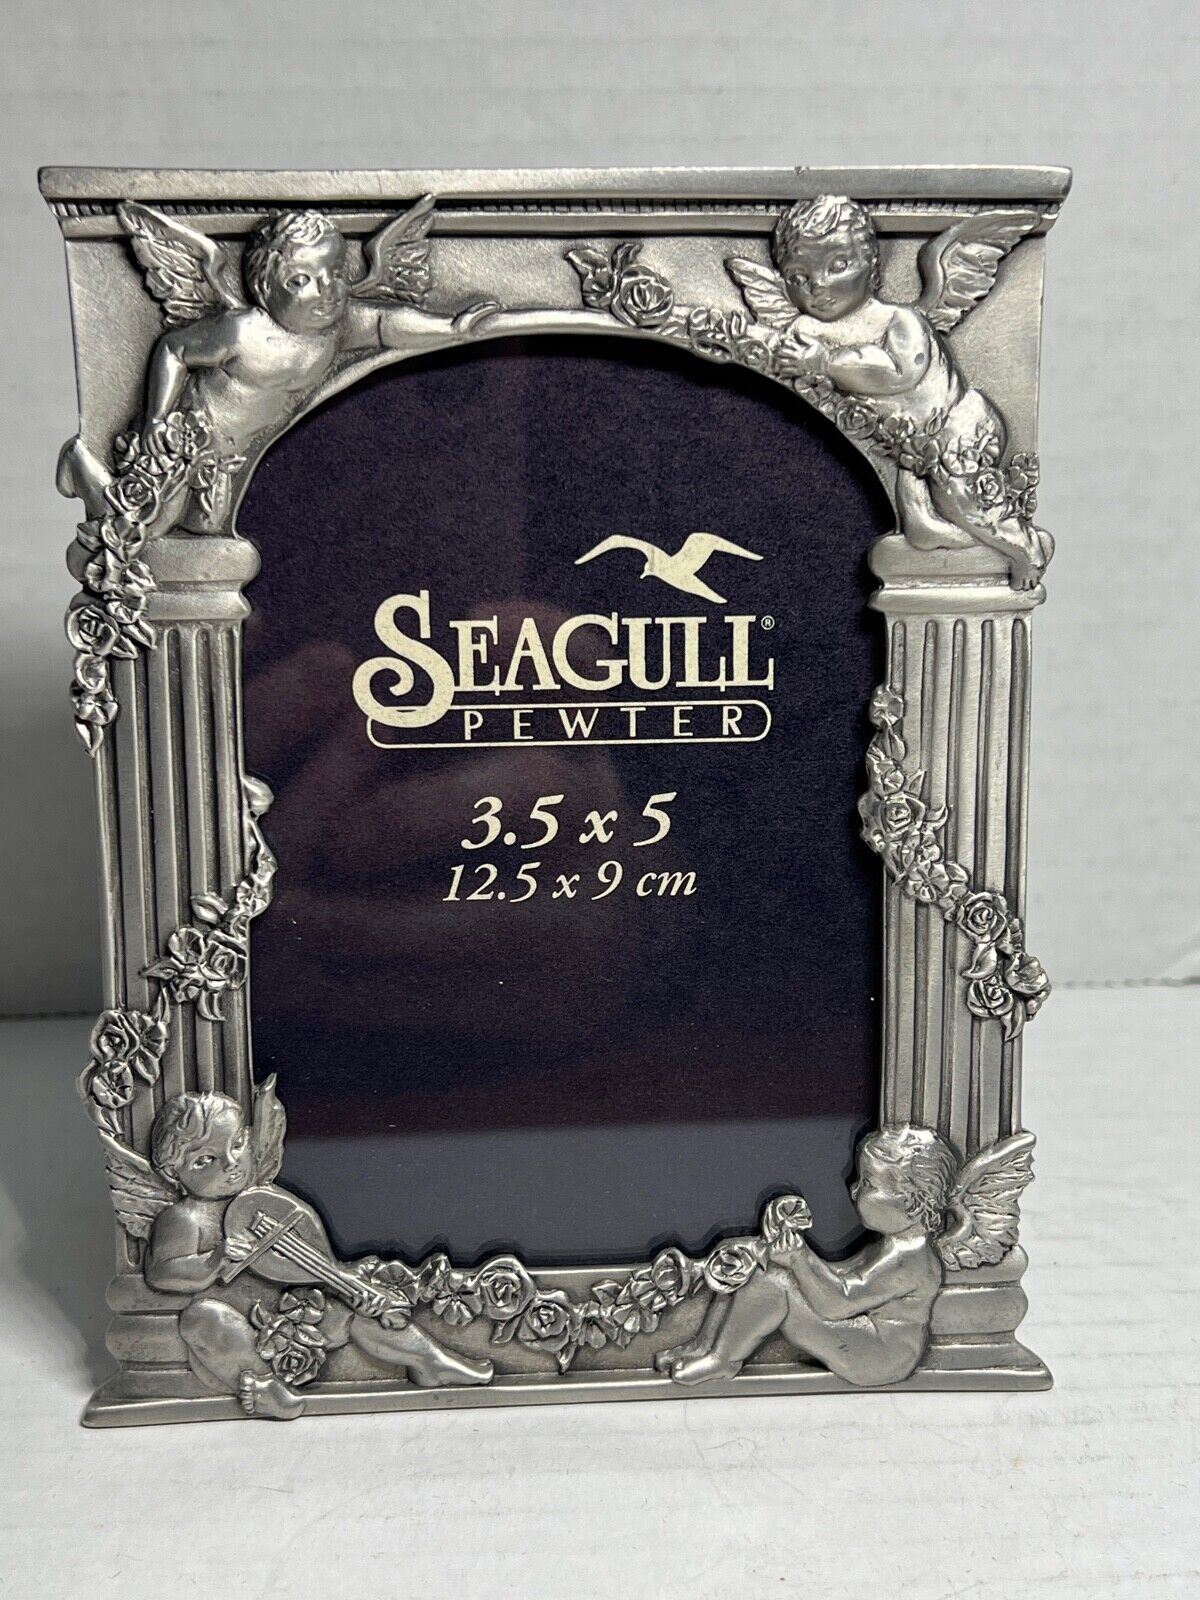 Seagull Pewter Picture Frames - 3.5